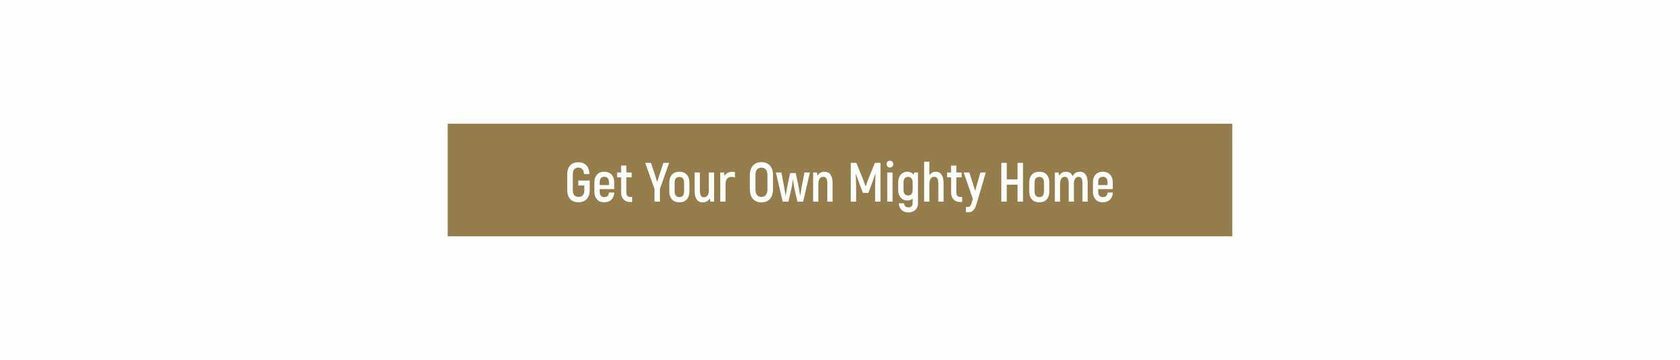 Get Your Own Mighty Home